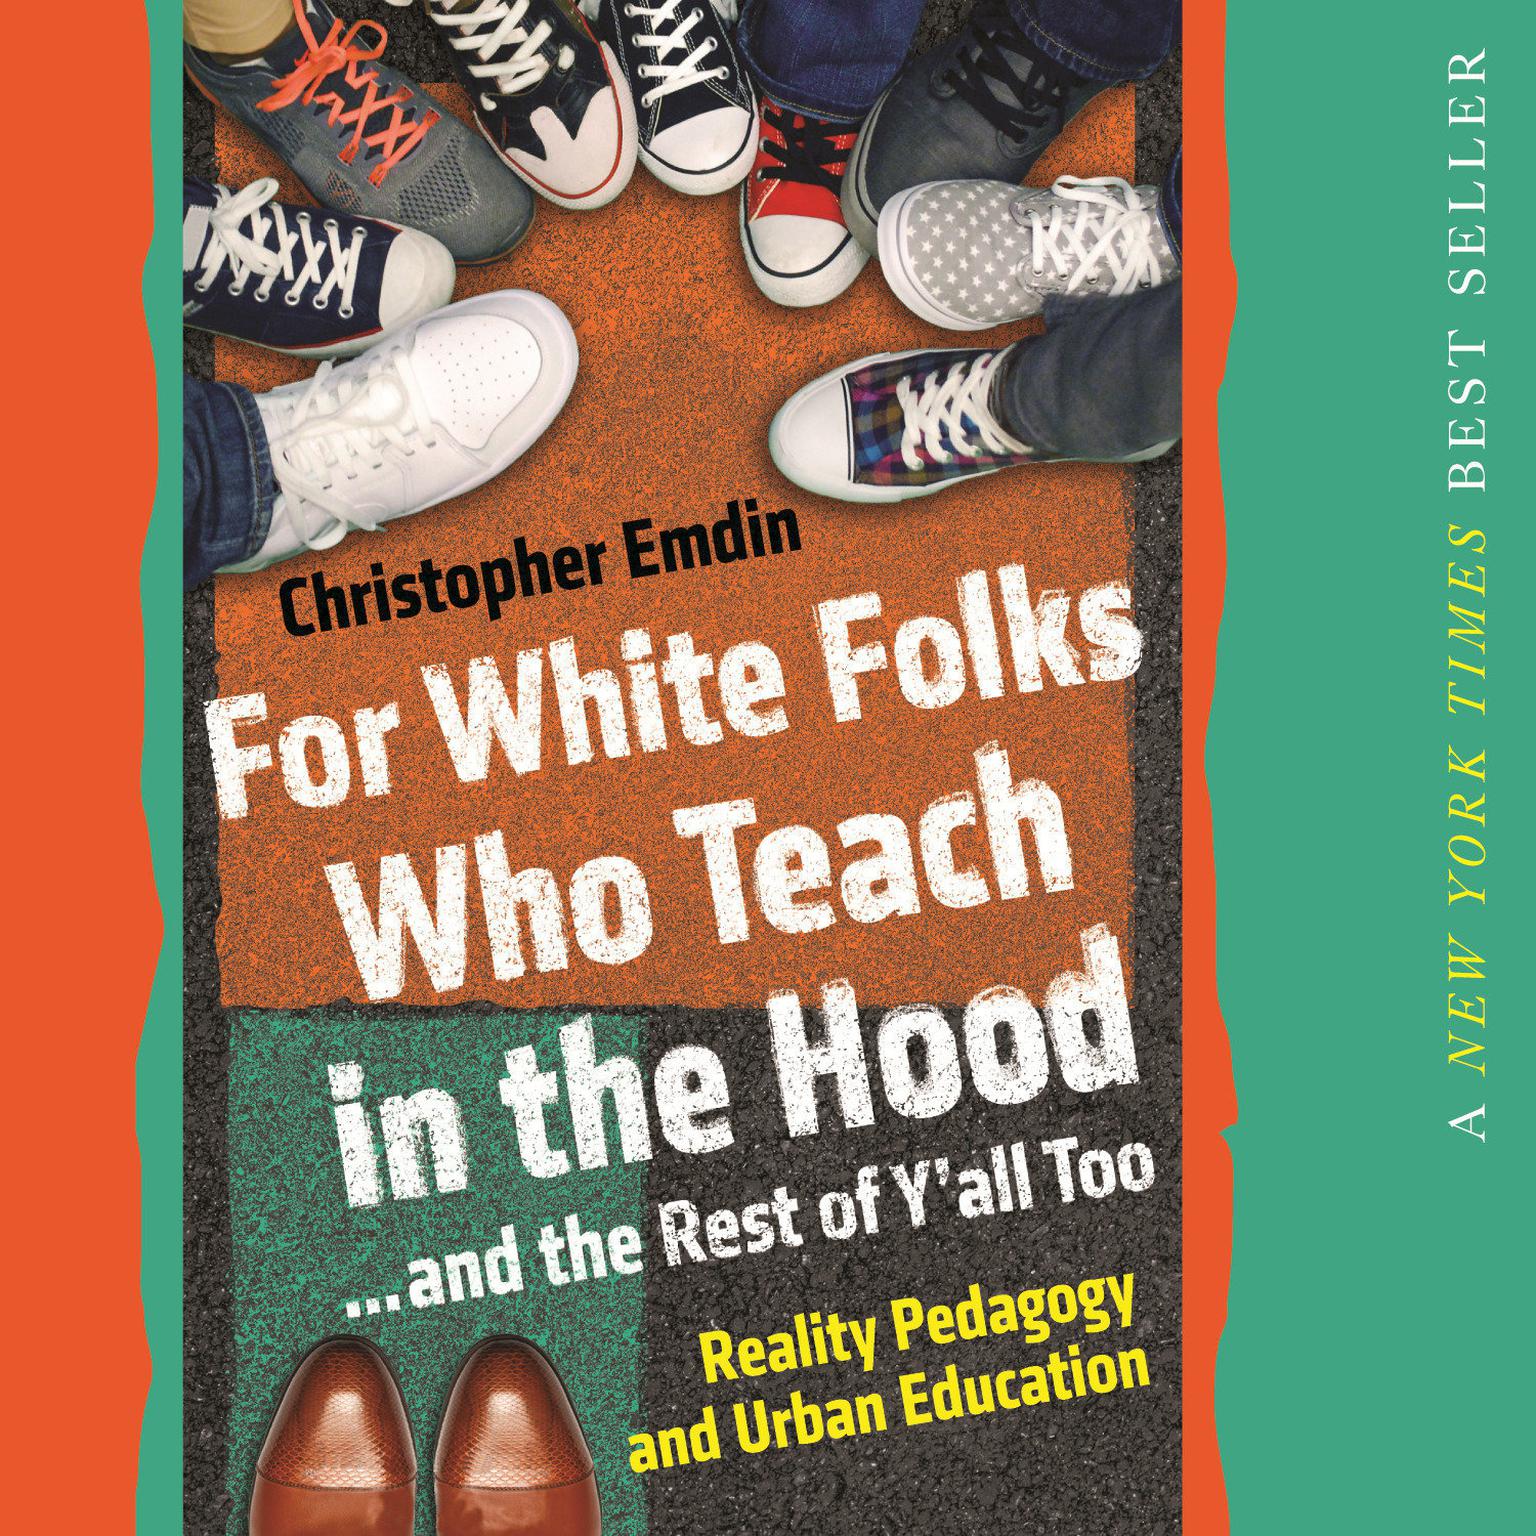 For White Folks Who Teach in the Hood... and the Rest of Yall Too: Reality Pedagogy and Urban Education Audiobook, by Christopher Emdin